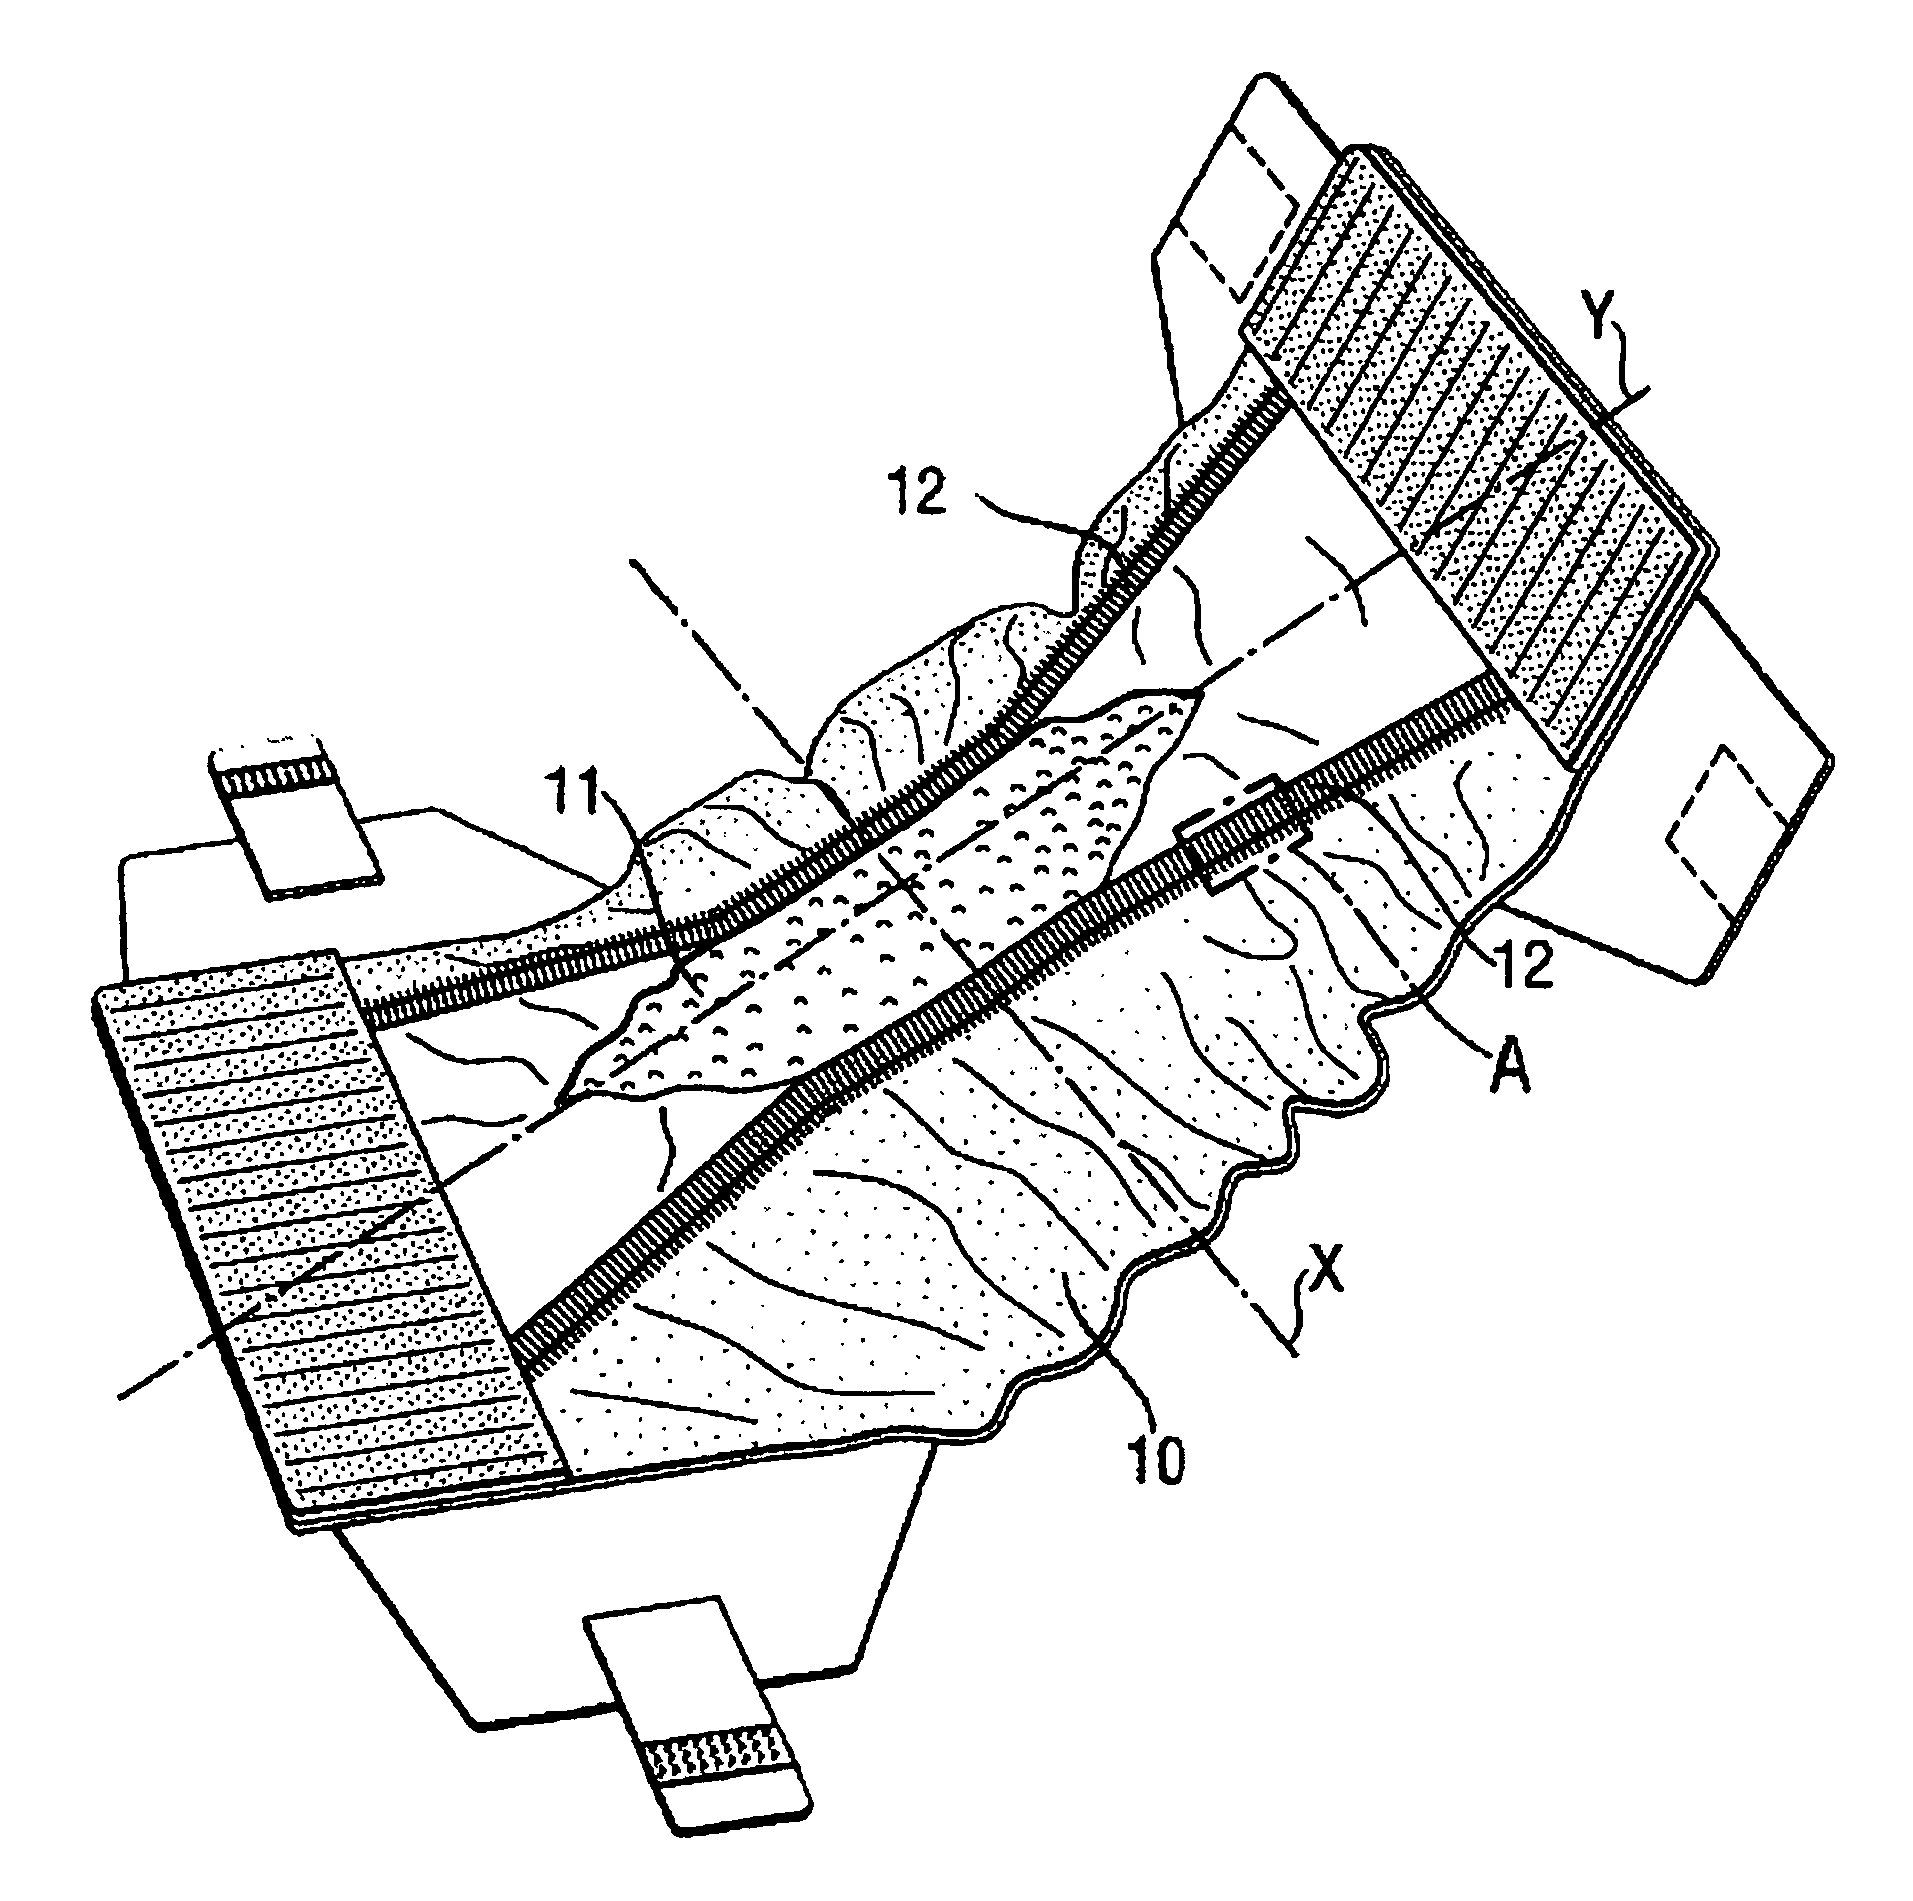 Absorbent article with composite sheet comprising elastic material